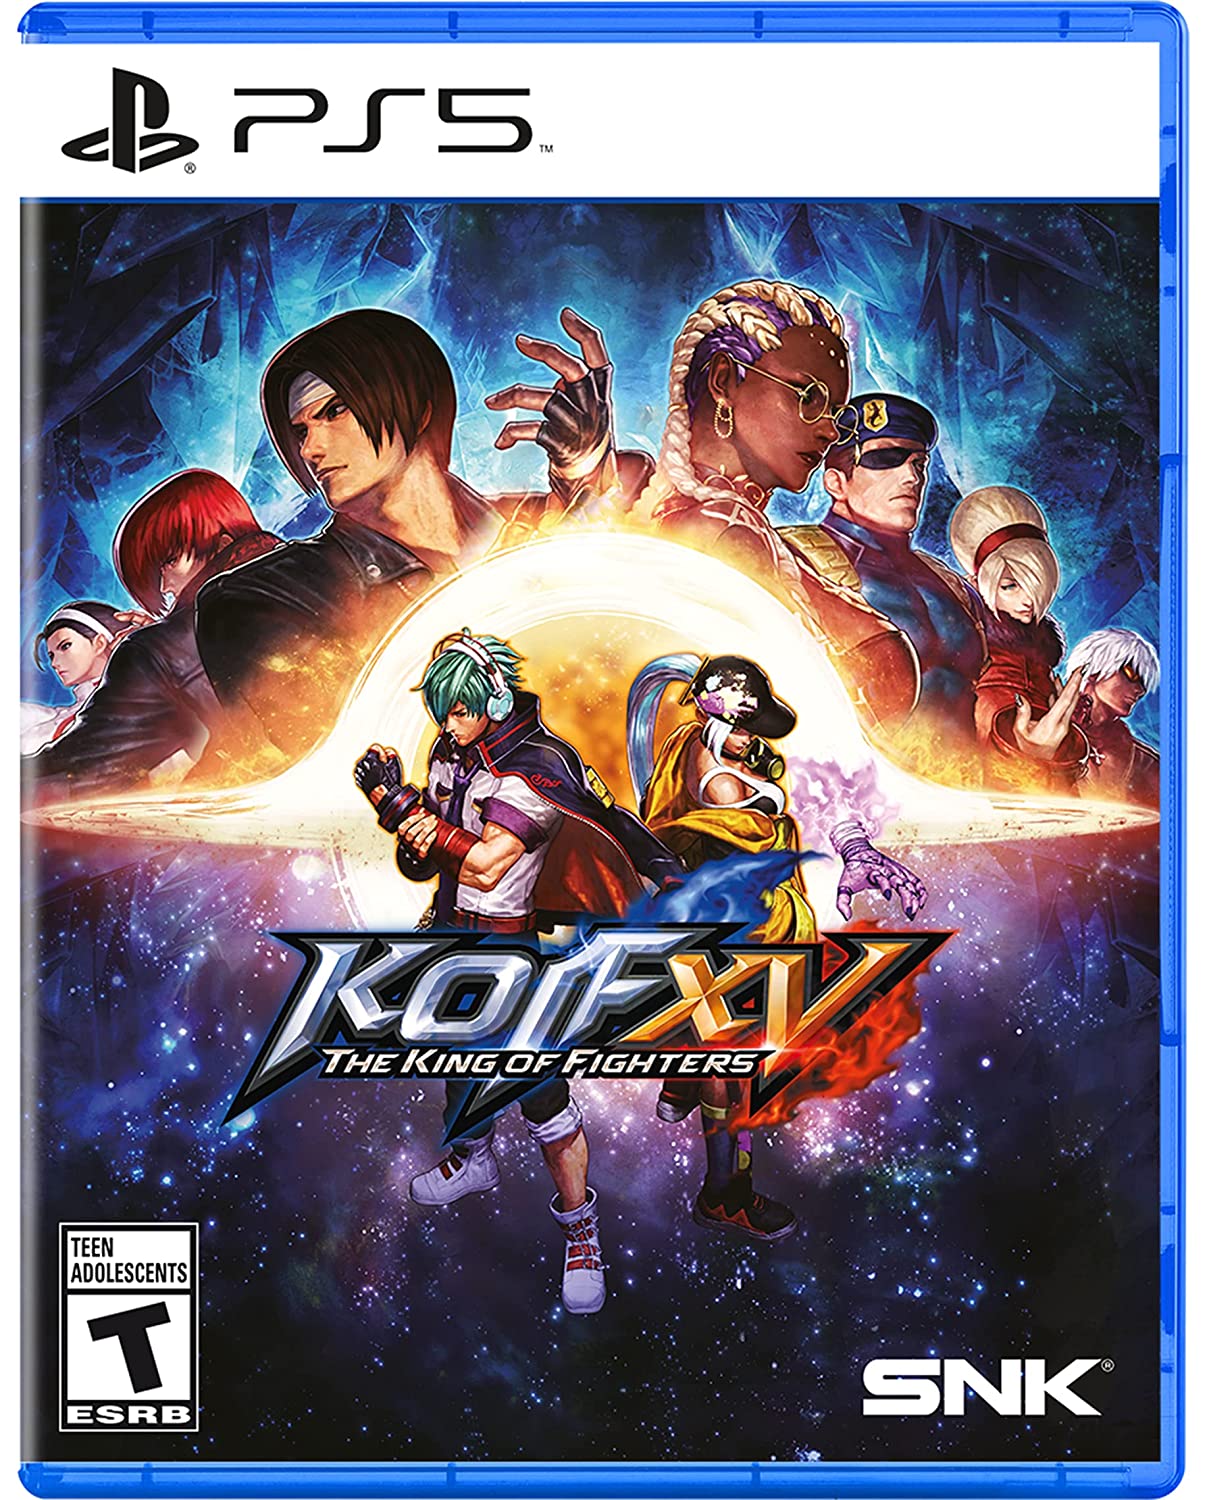 Amazon Prime Members: The King of Fighters XV (PS5/PS4 or Xbox Series X) $29.99 + Free Shipping via Amazon